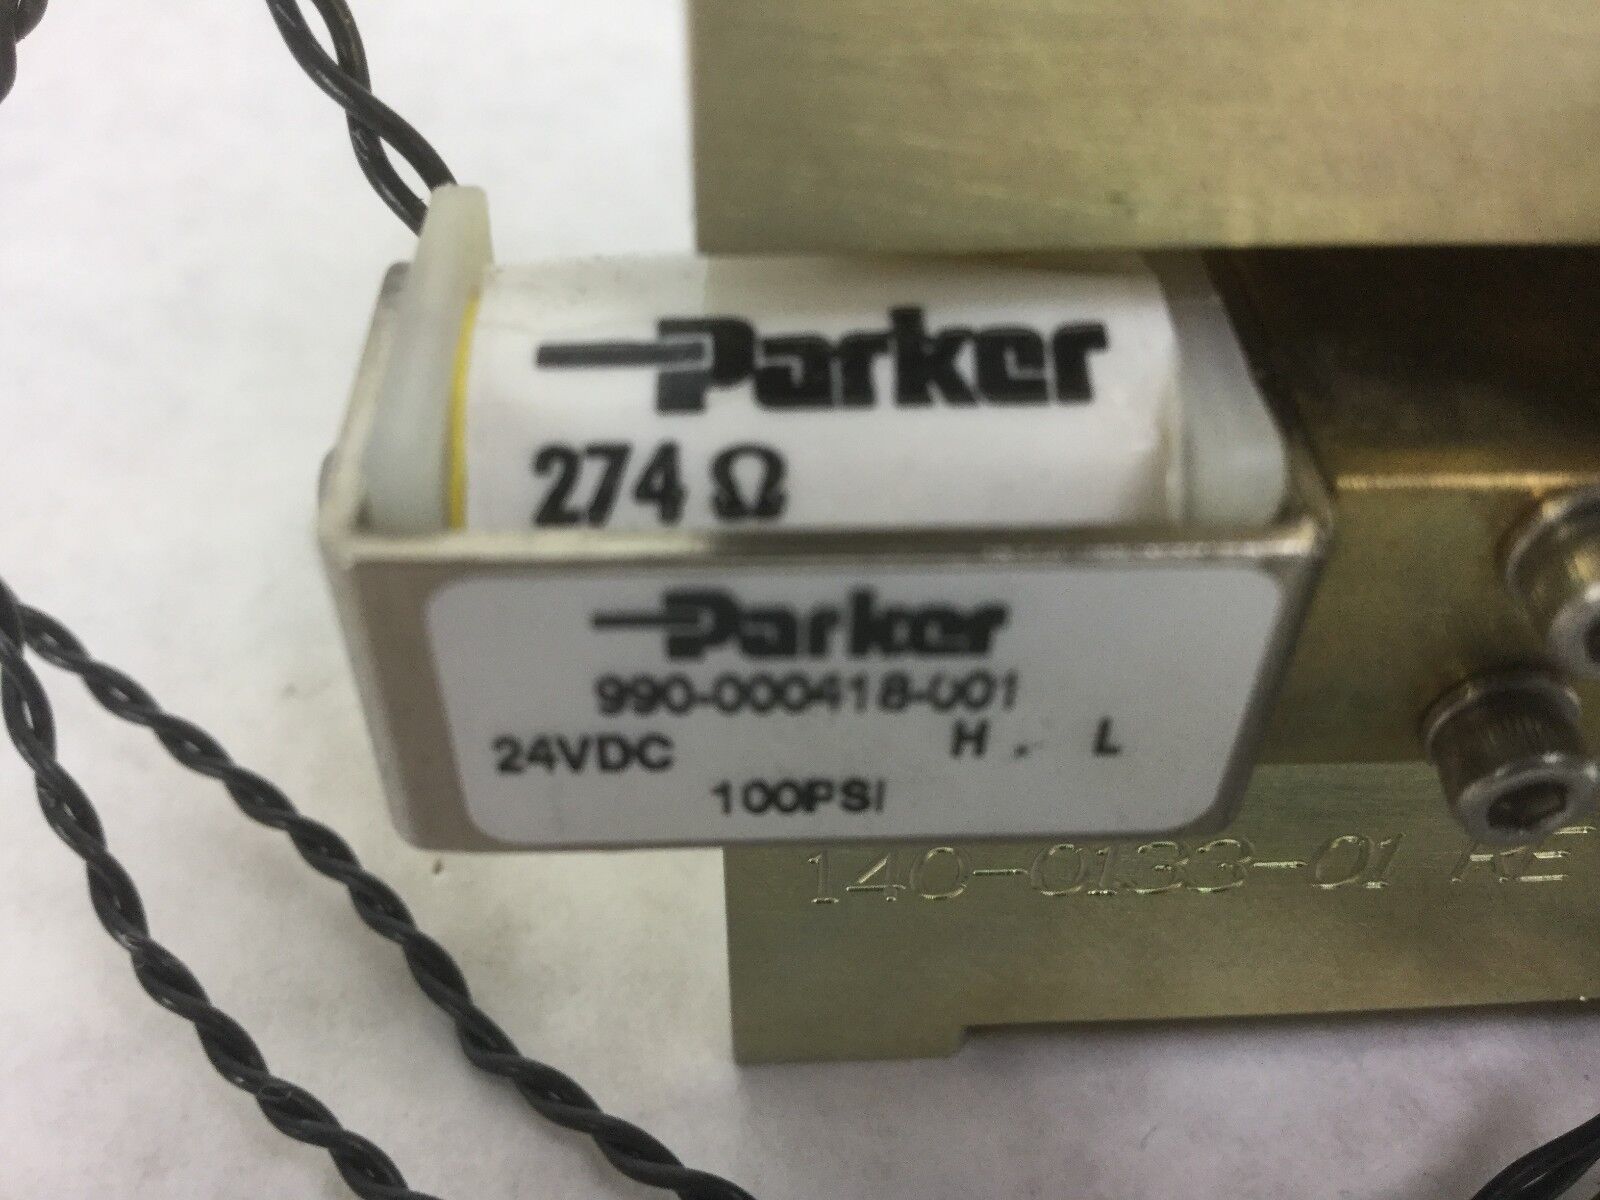 Parker 990-000418-001, Untested